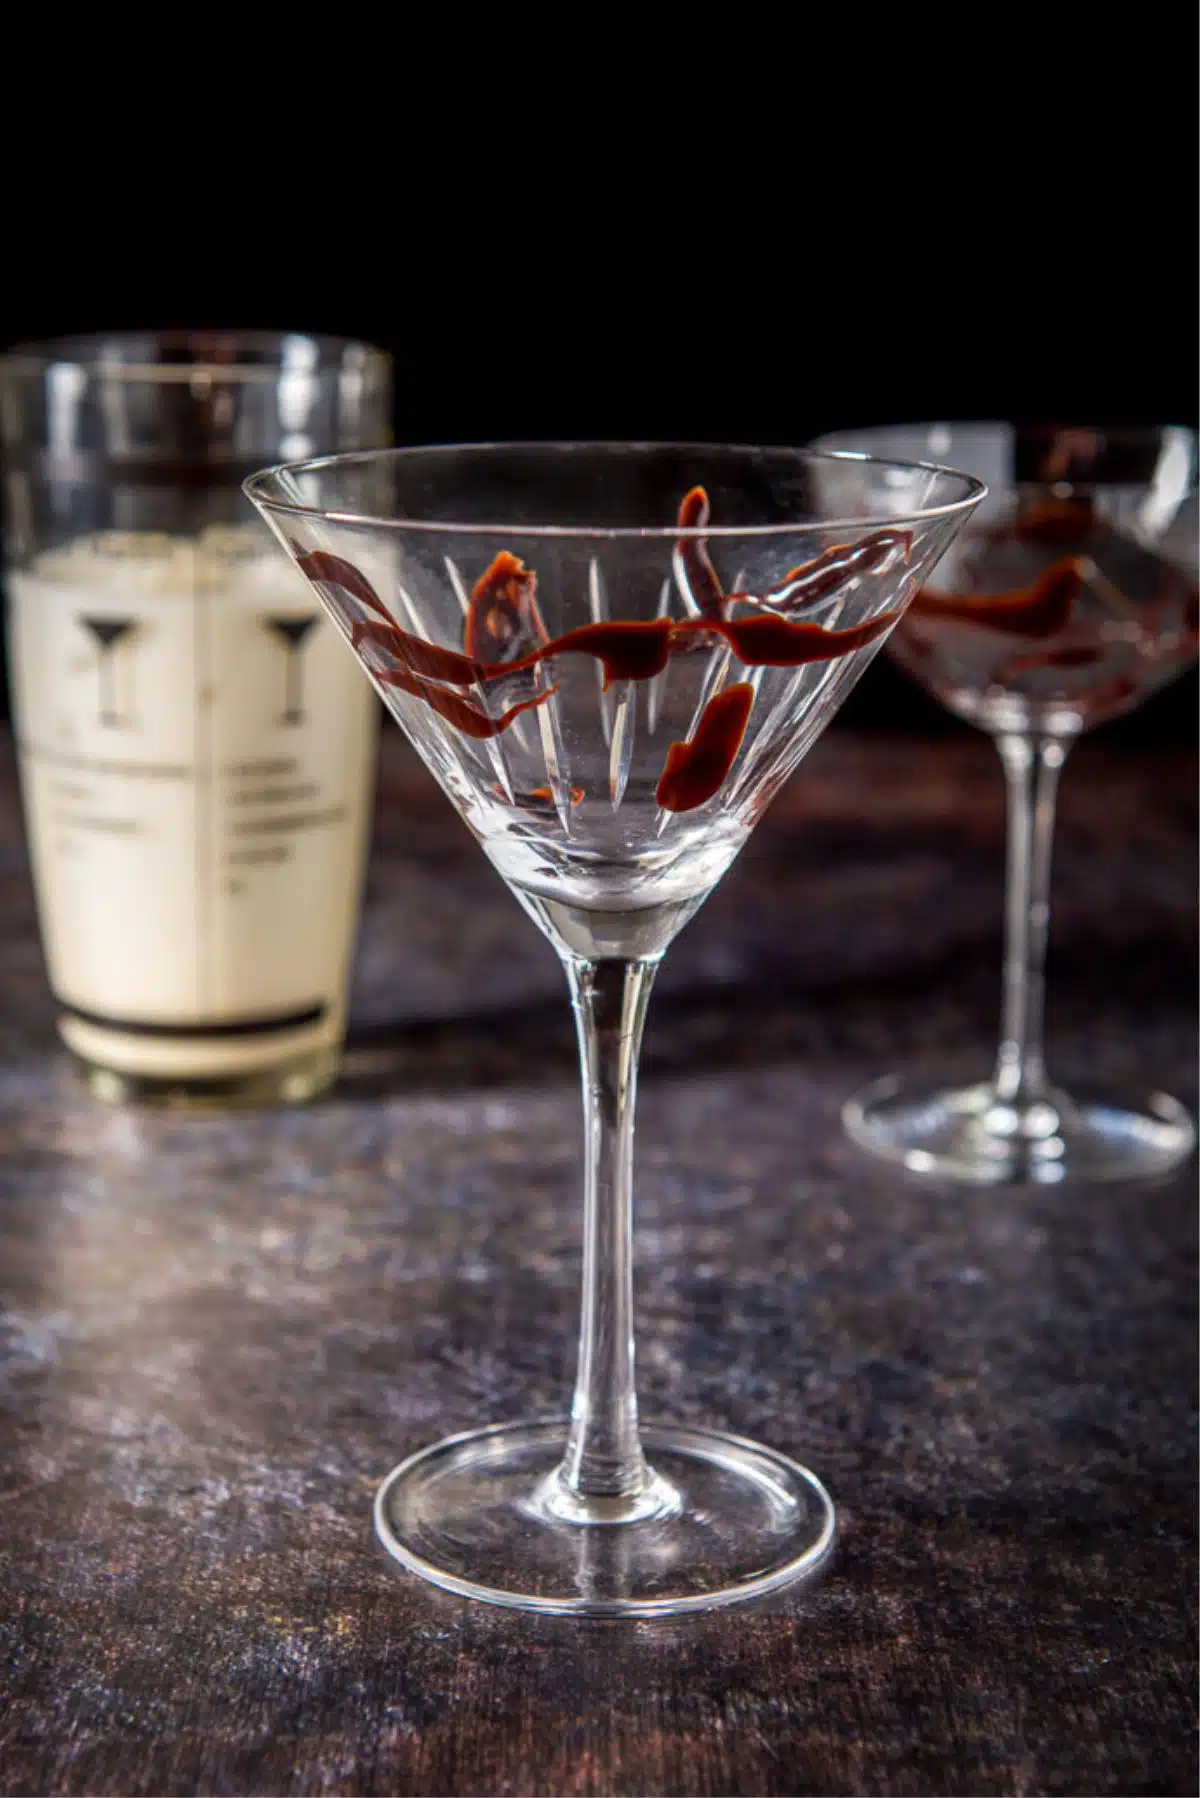 Chocolate sauce swirled in the glasses as garnish with the filled shaker in the background